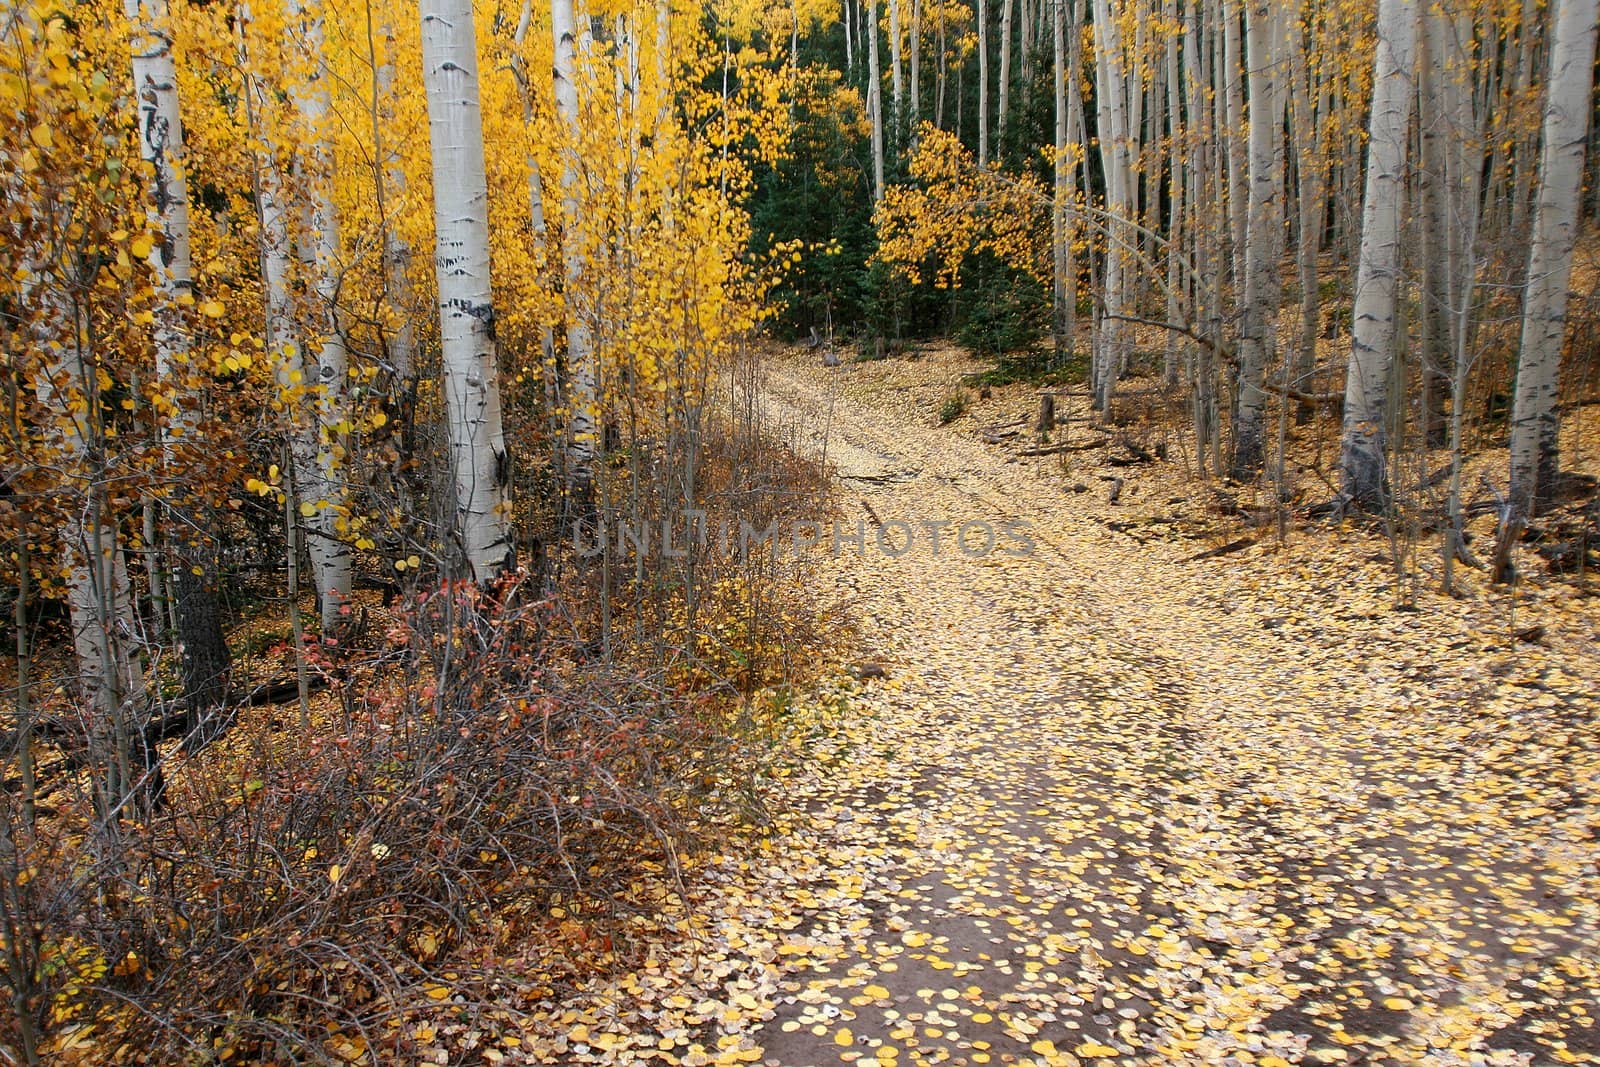 Autumn Aspen Path by Auldwhispers